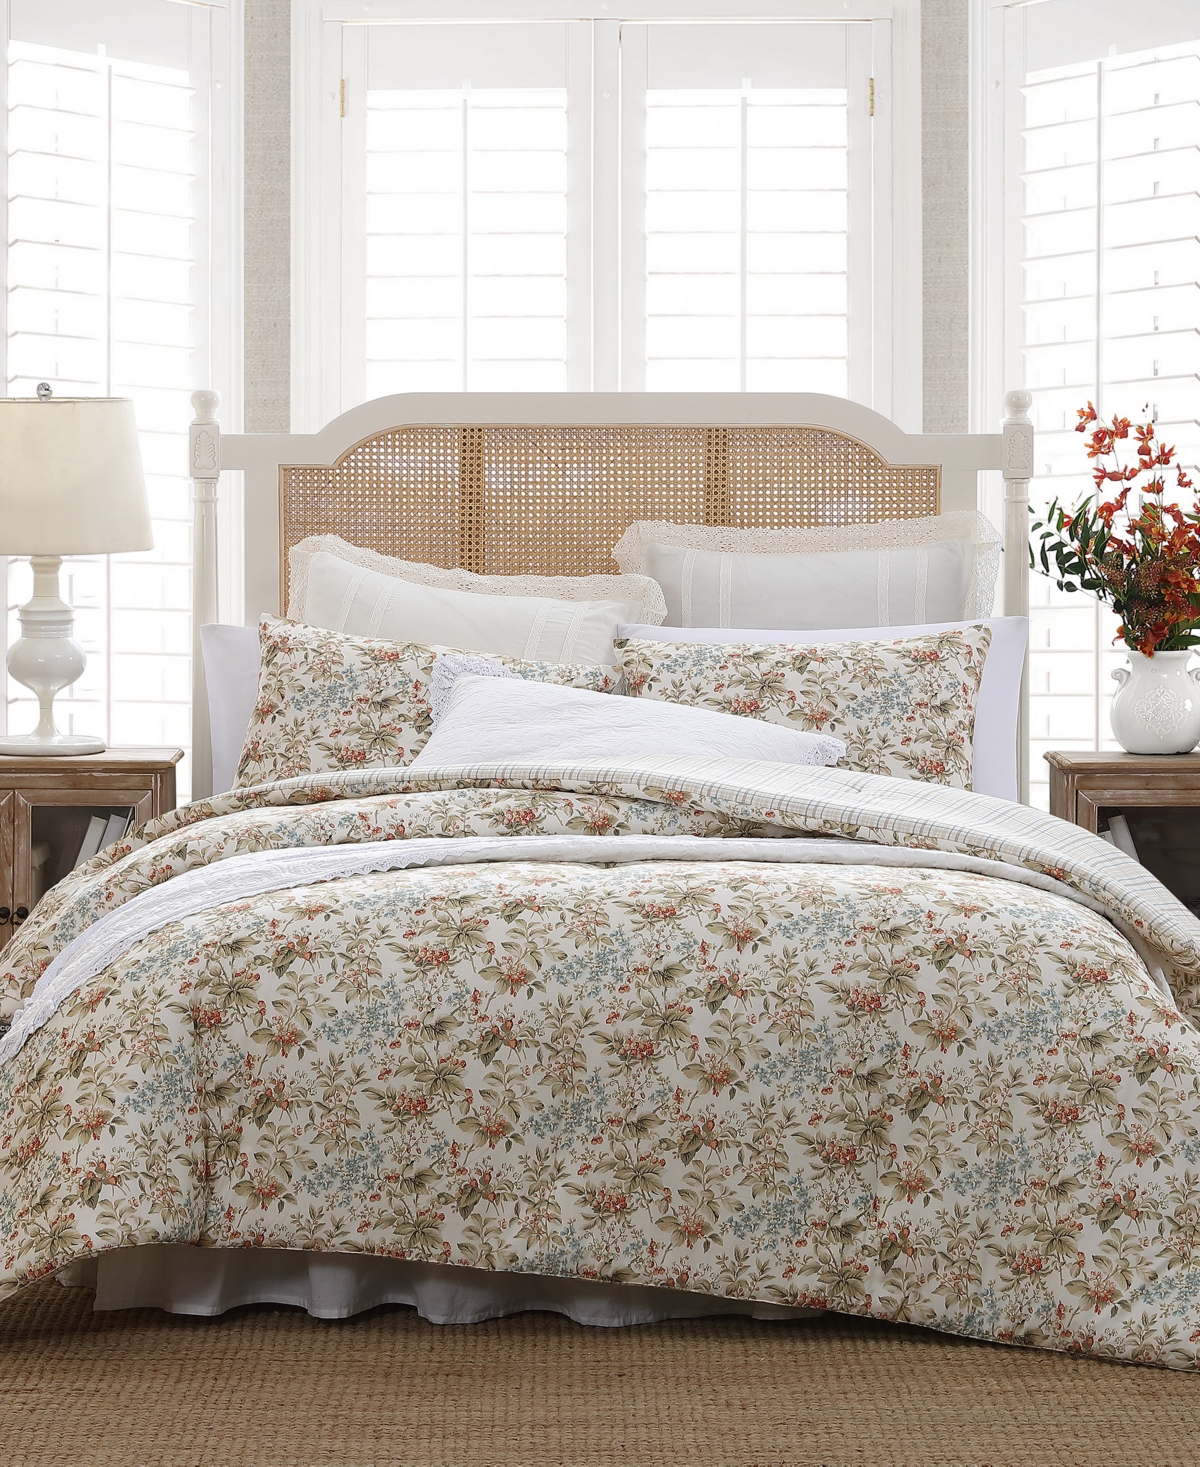 Laura Ashley Bramble Floral Cotton Reversible 3-piece Comforter Set, Full/queen In Persimmon,wheat